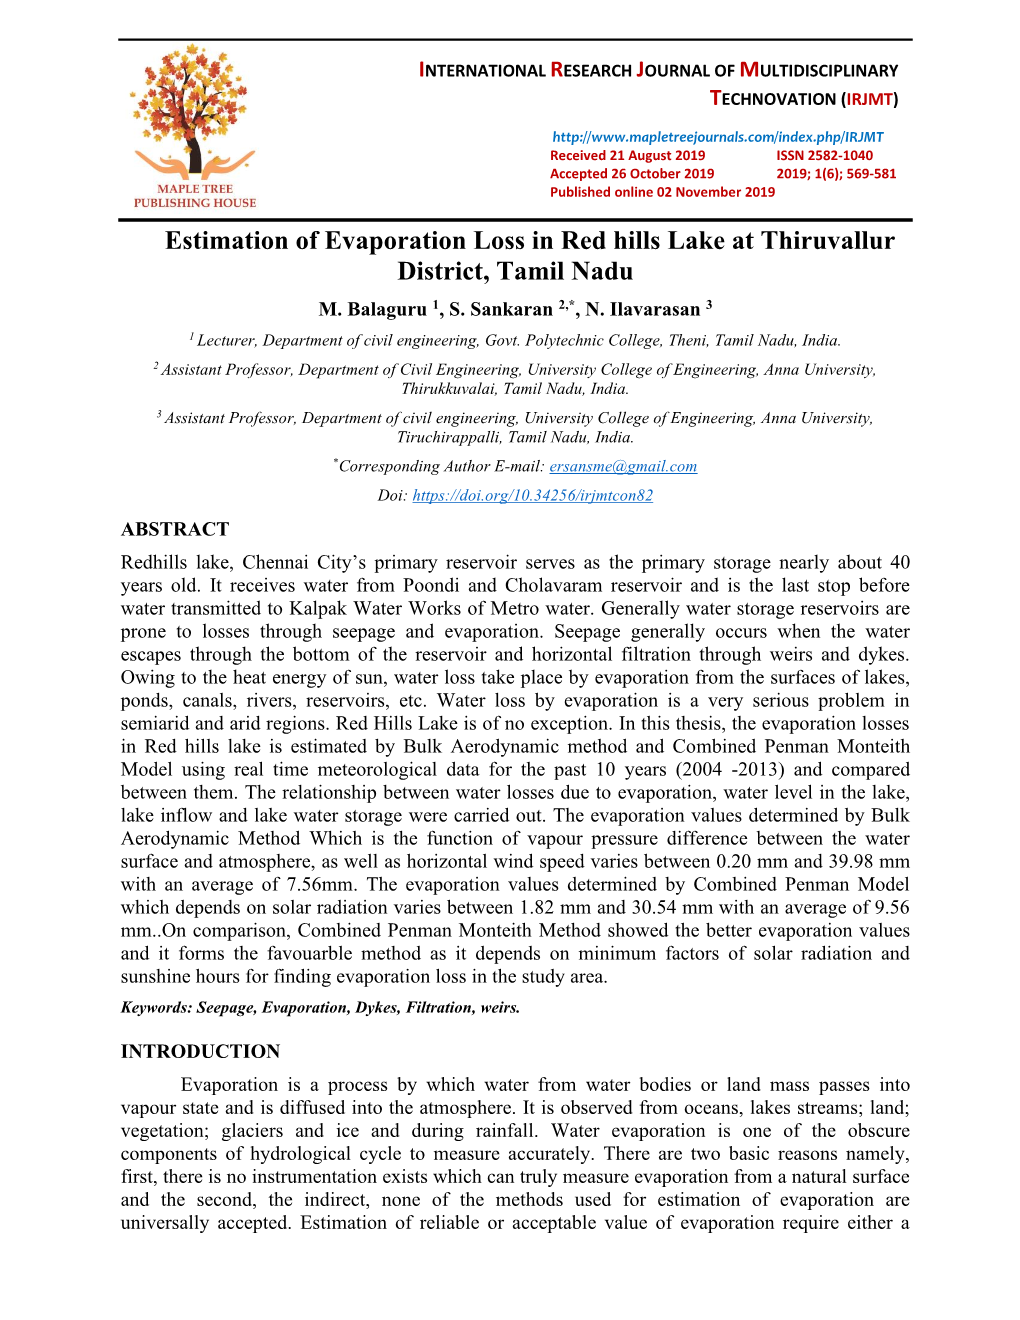 Estimation of Evaporation Loss in Red Hills Lake at Thiruvallur District, Tamil Nadu